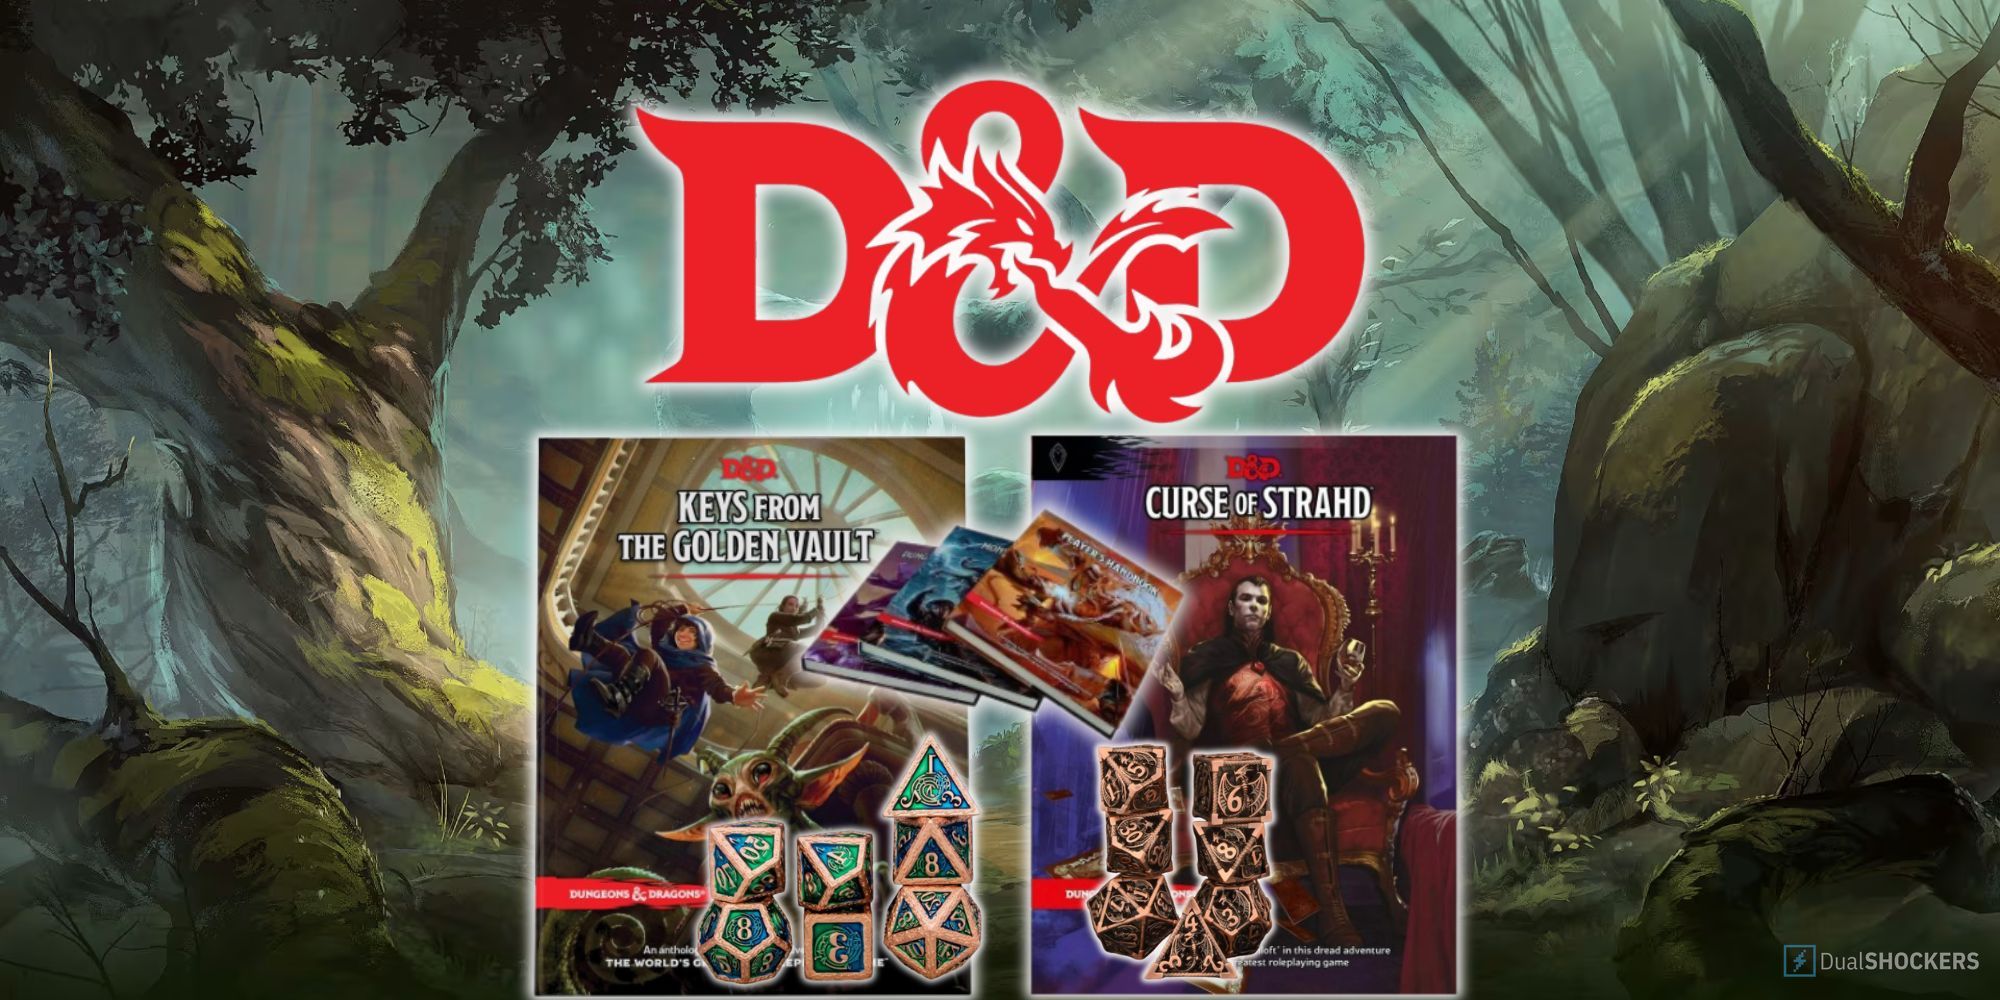 Dungeons & Dragons logo on a fantasy woodland background with tabletop books and dice